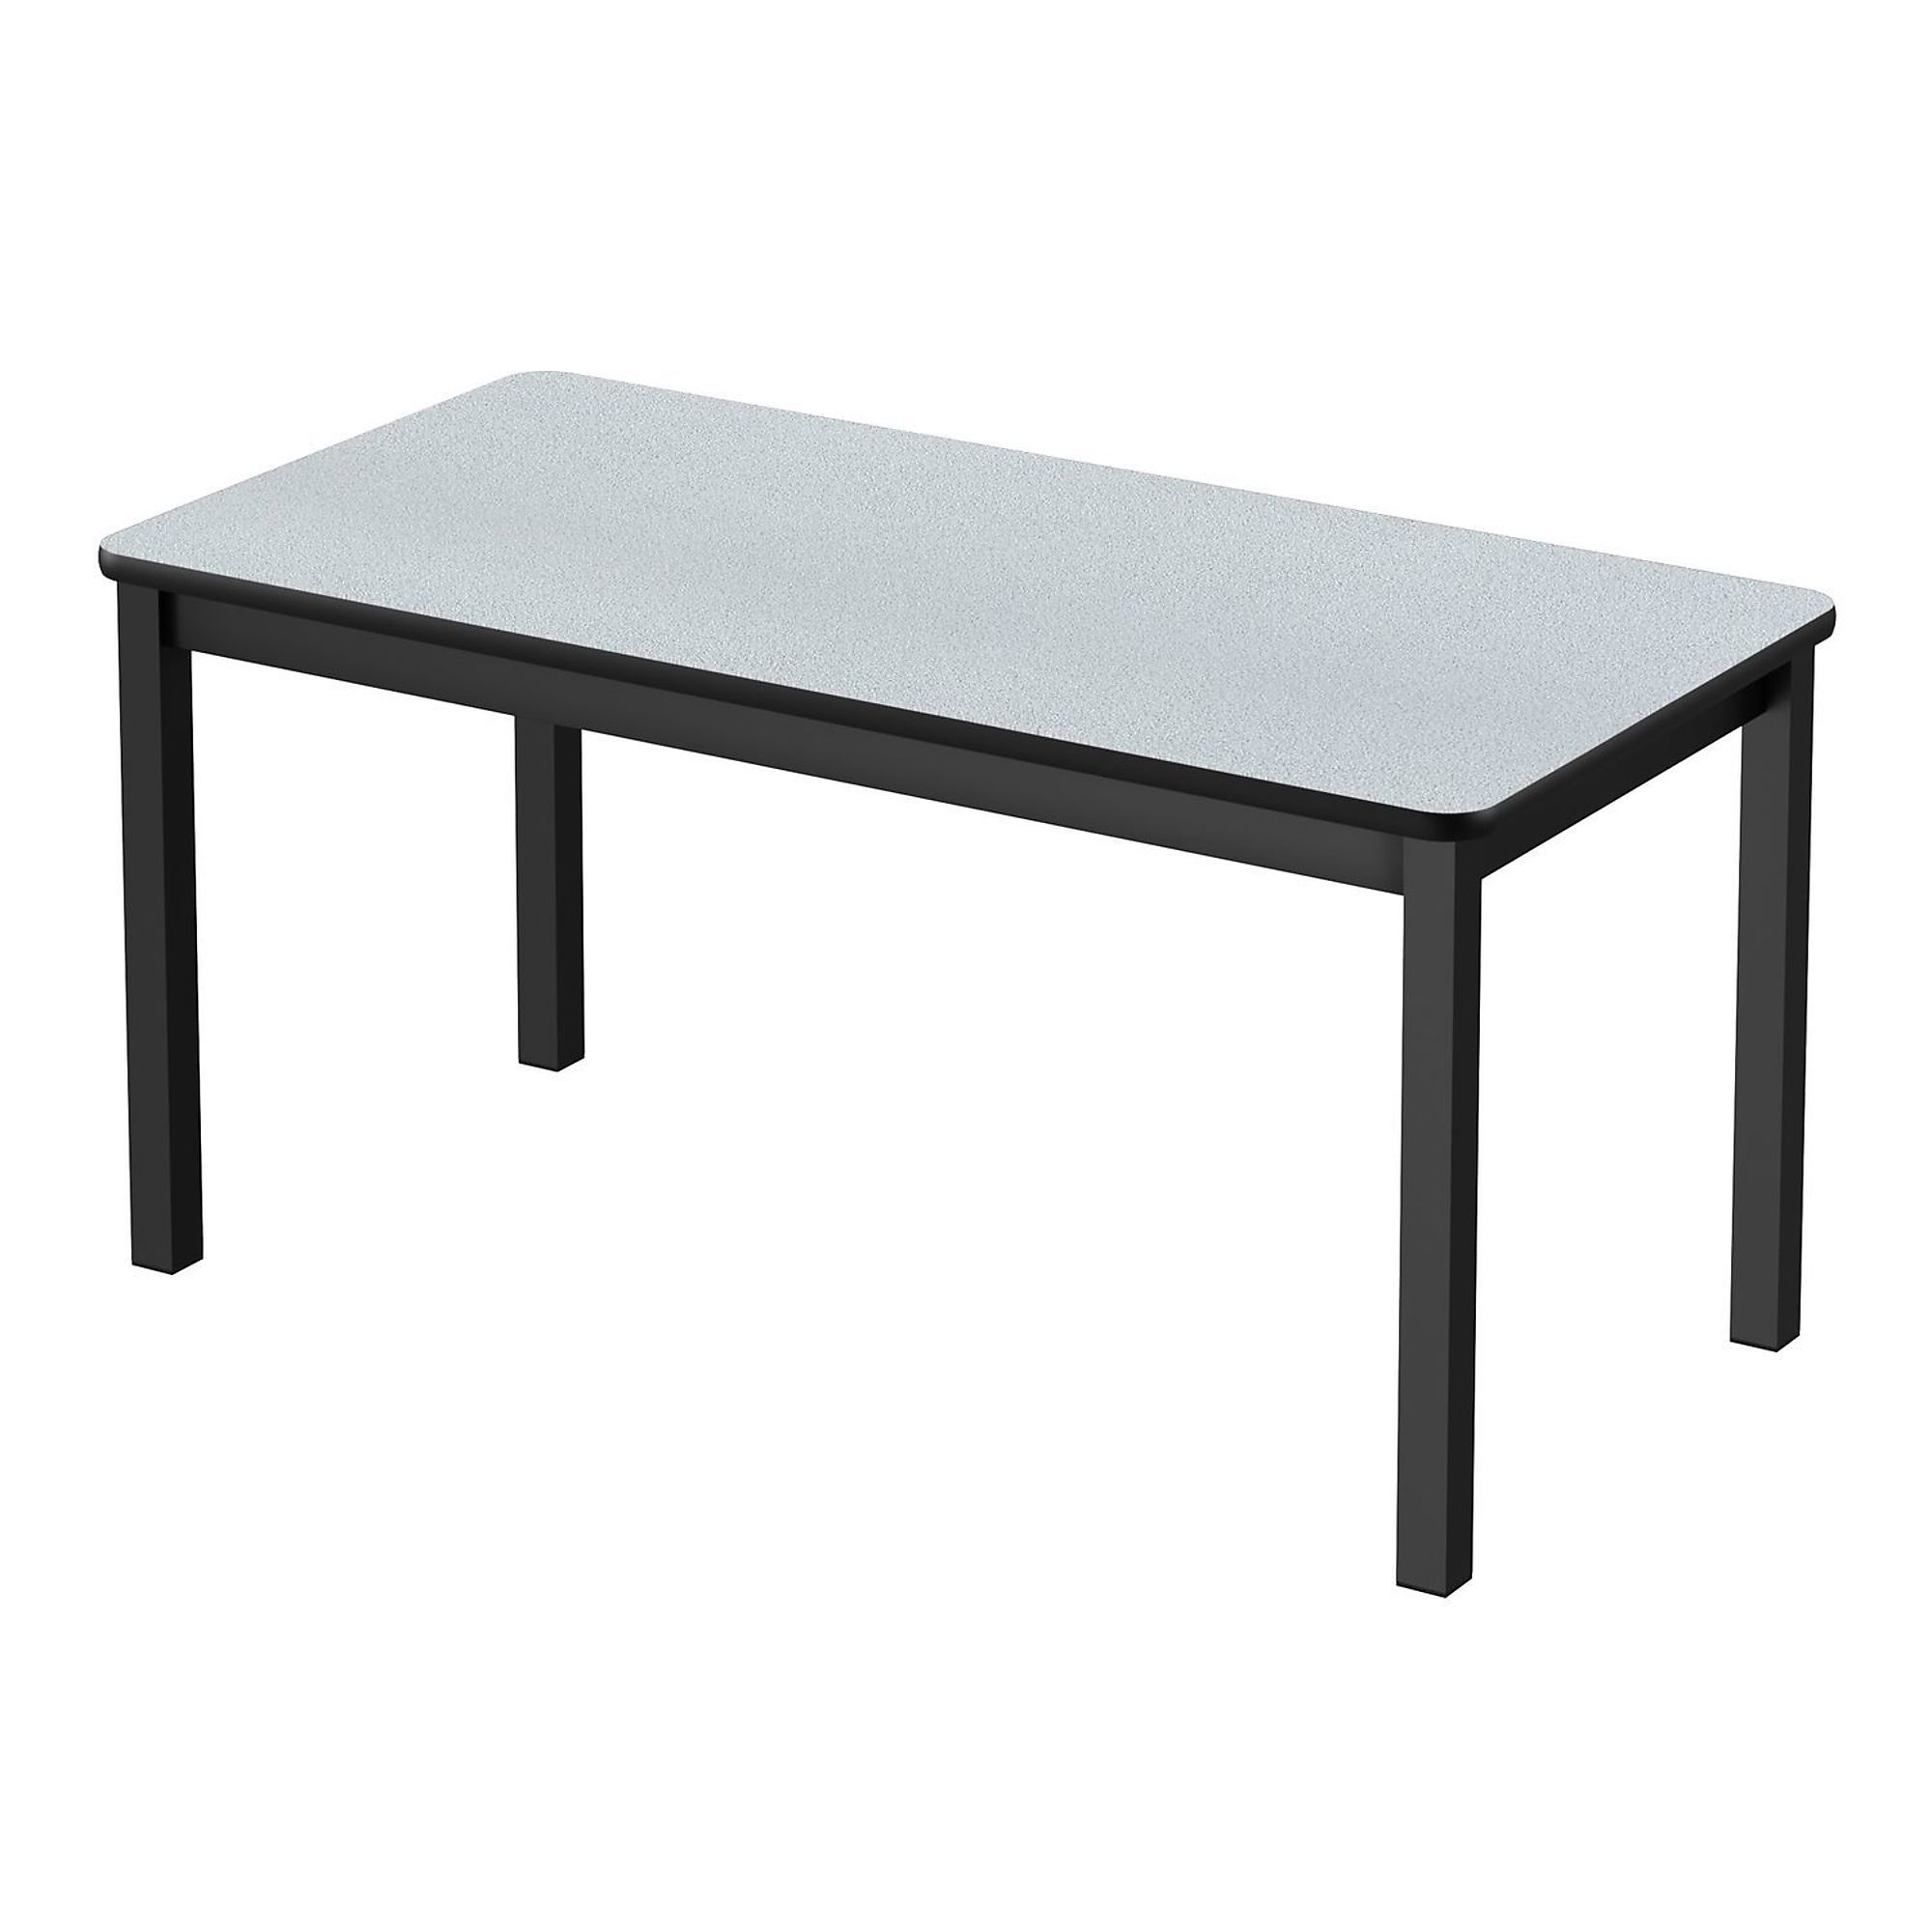 Correll, TFL Library Table, Gray Granite, 36x60, Height 29 in, Width 30 in, Length 60 in, Model LR3060TF-15